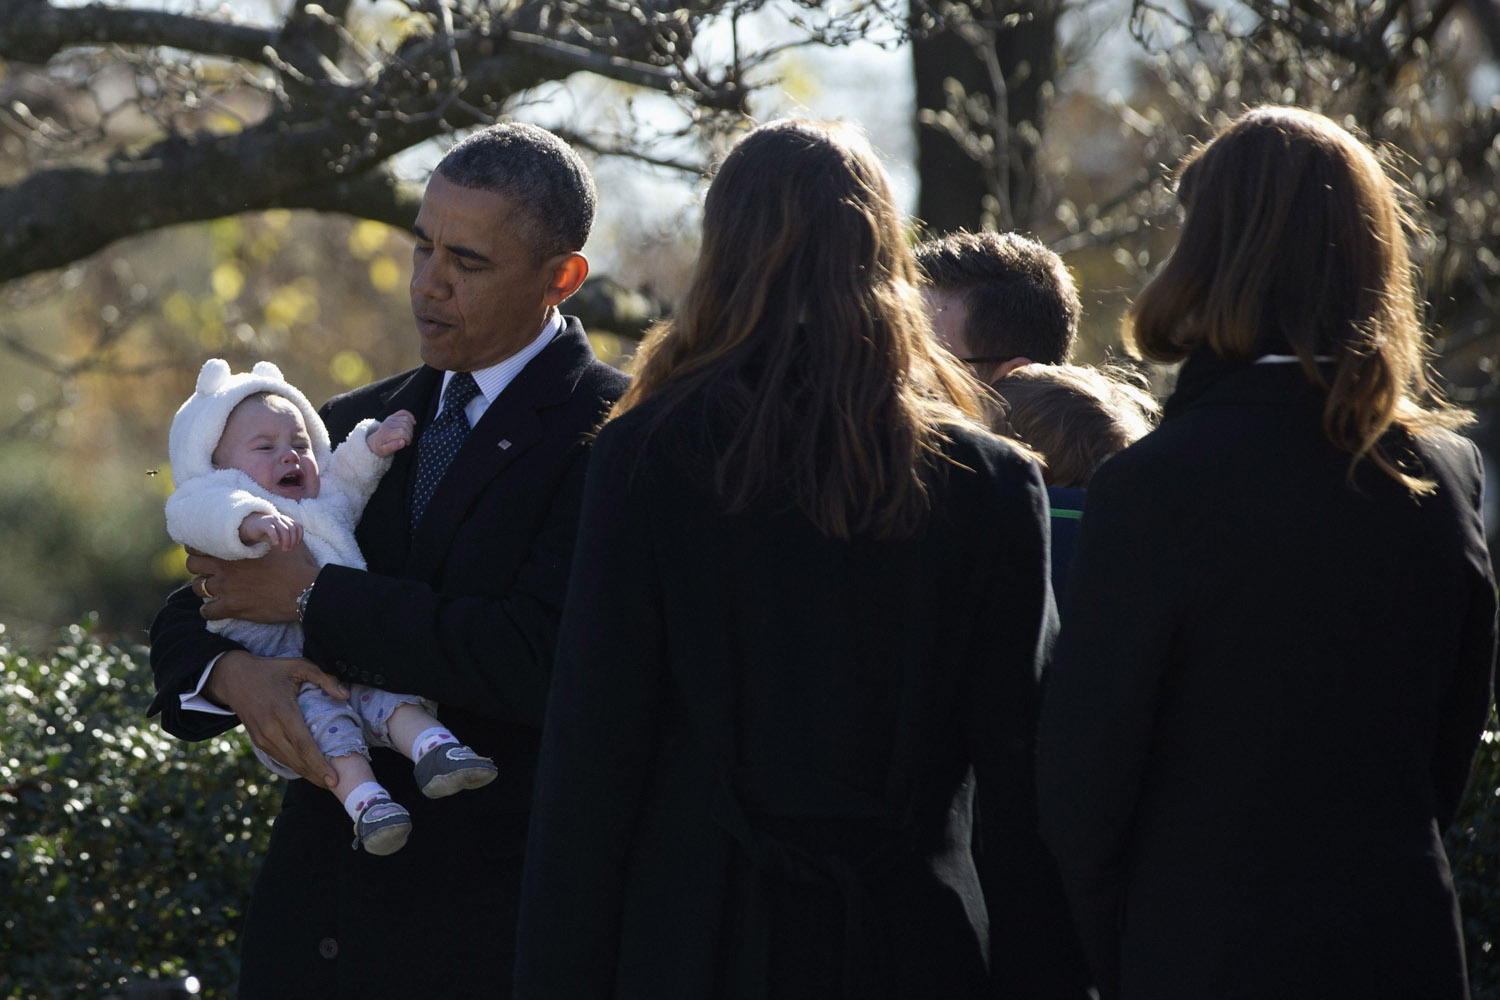 Nov. 20, 2013. U.S. President Barack Obama holds a baby, part of the Kennedy extended family, during a wreath laying in honor of assassinated U.S. President John F. Kennedy at Arlington National Cemetery near Washington.